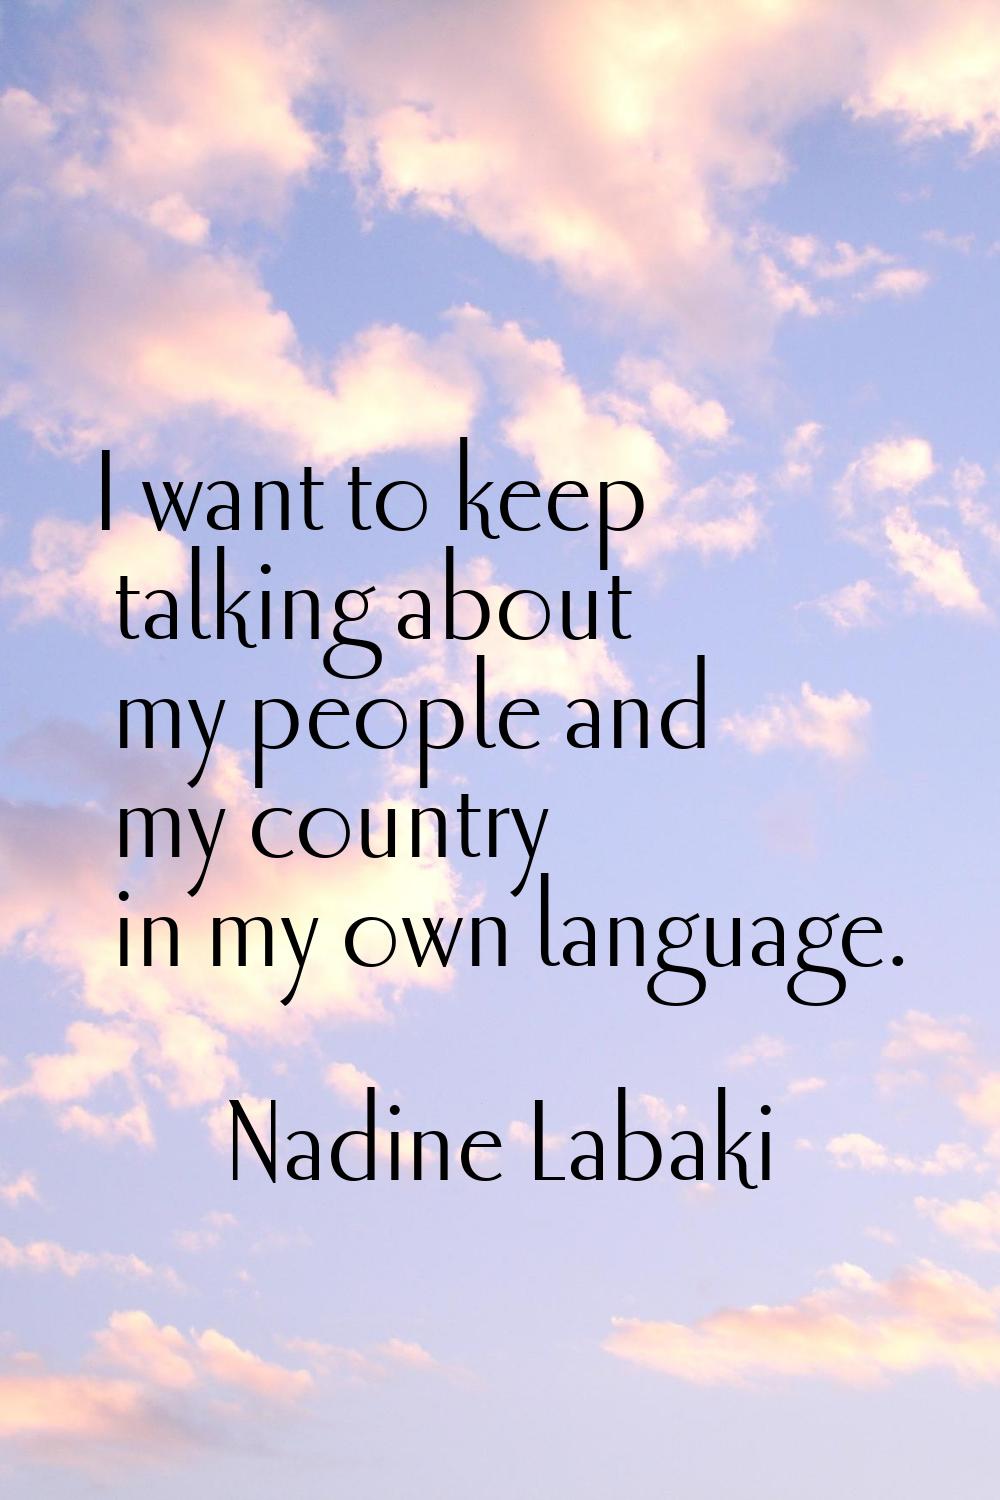 I want to keep talking about my people and my country in my own language.